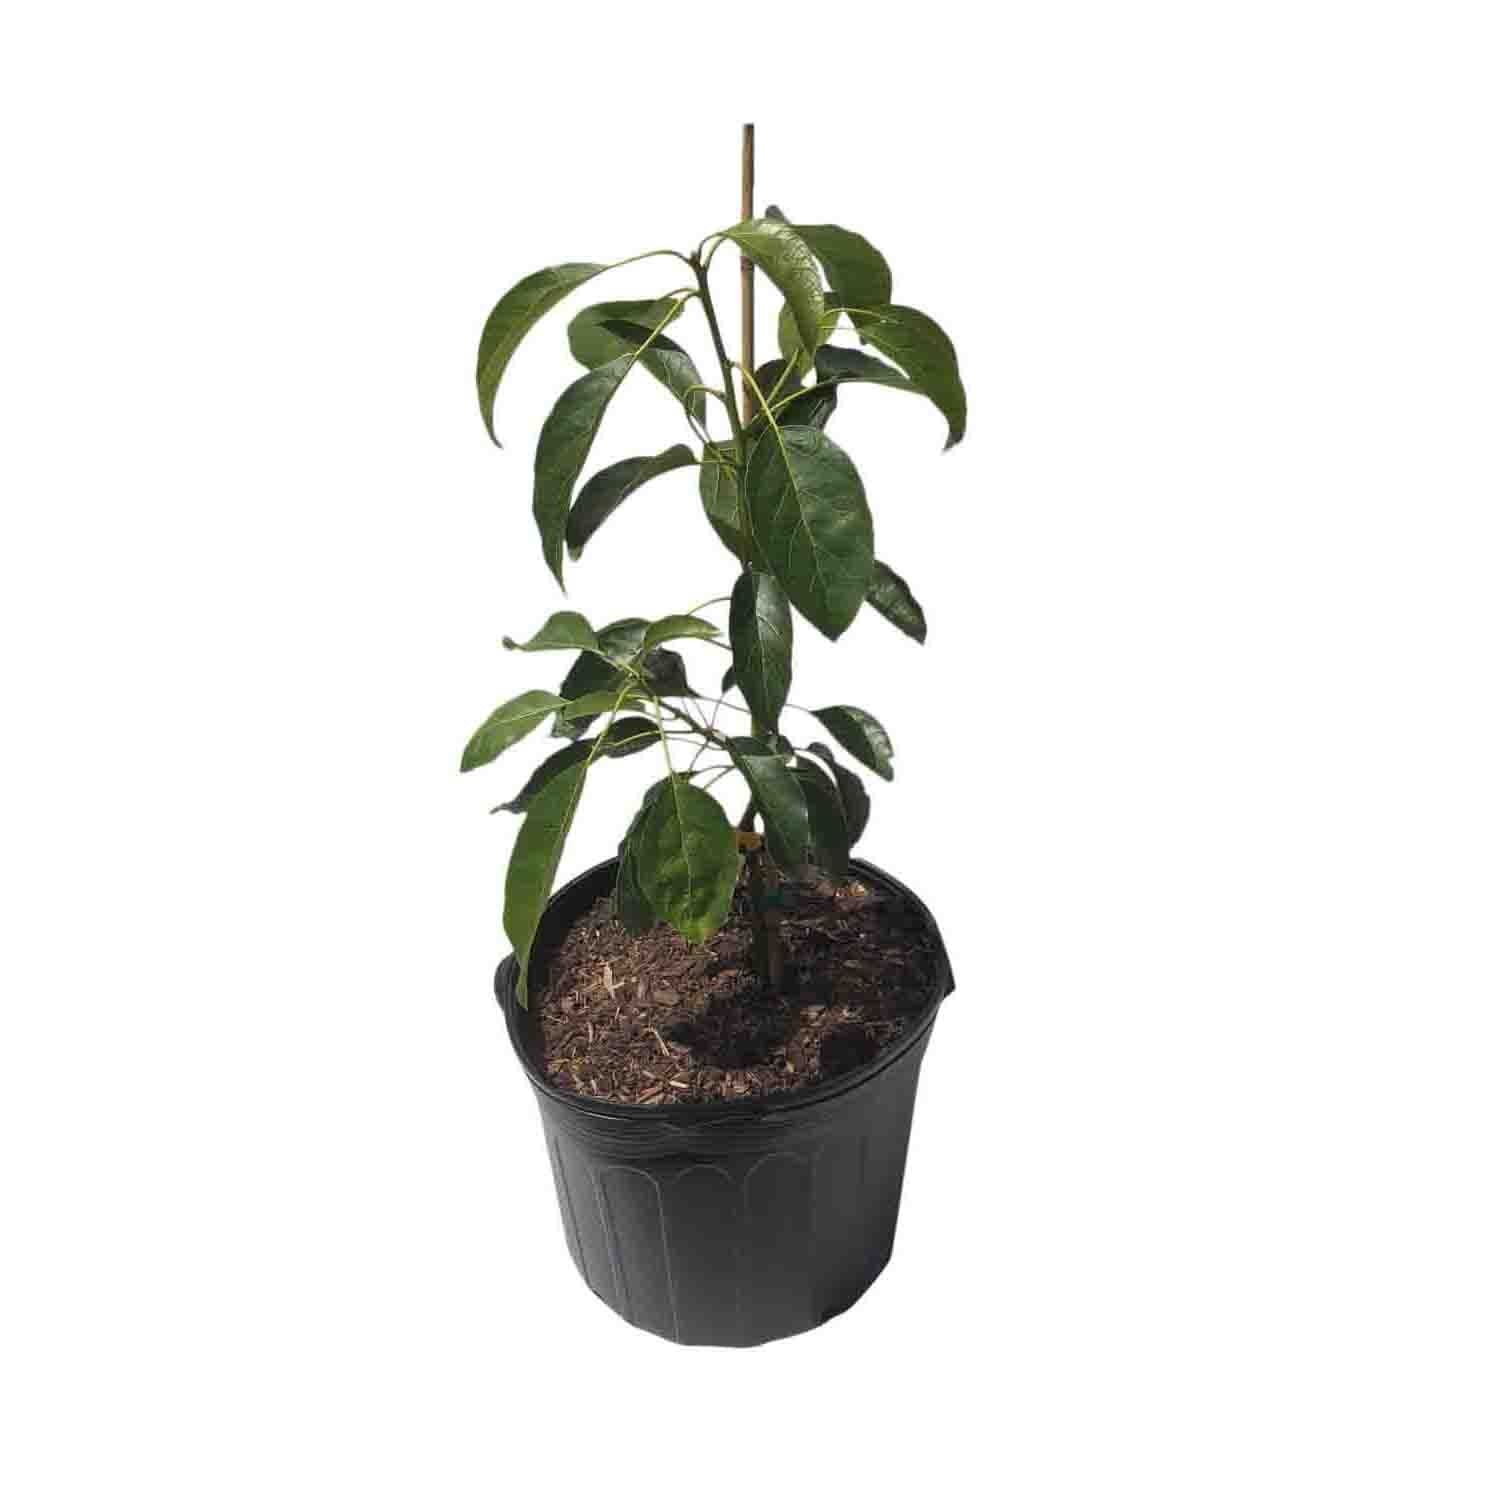 Hass Avocado Tree, Grafted, 7 Gal Container from Florida